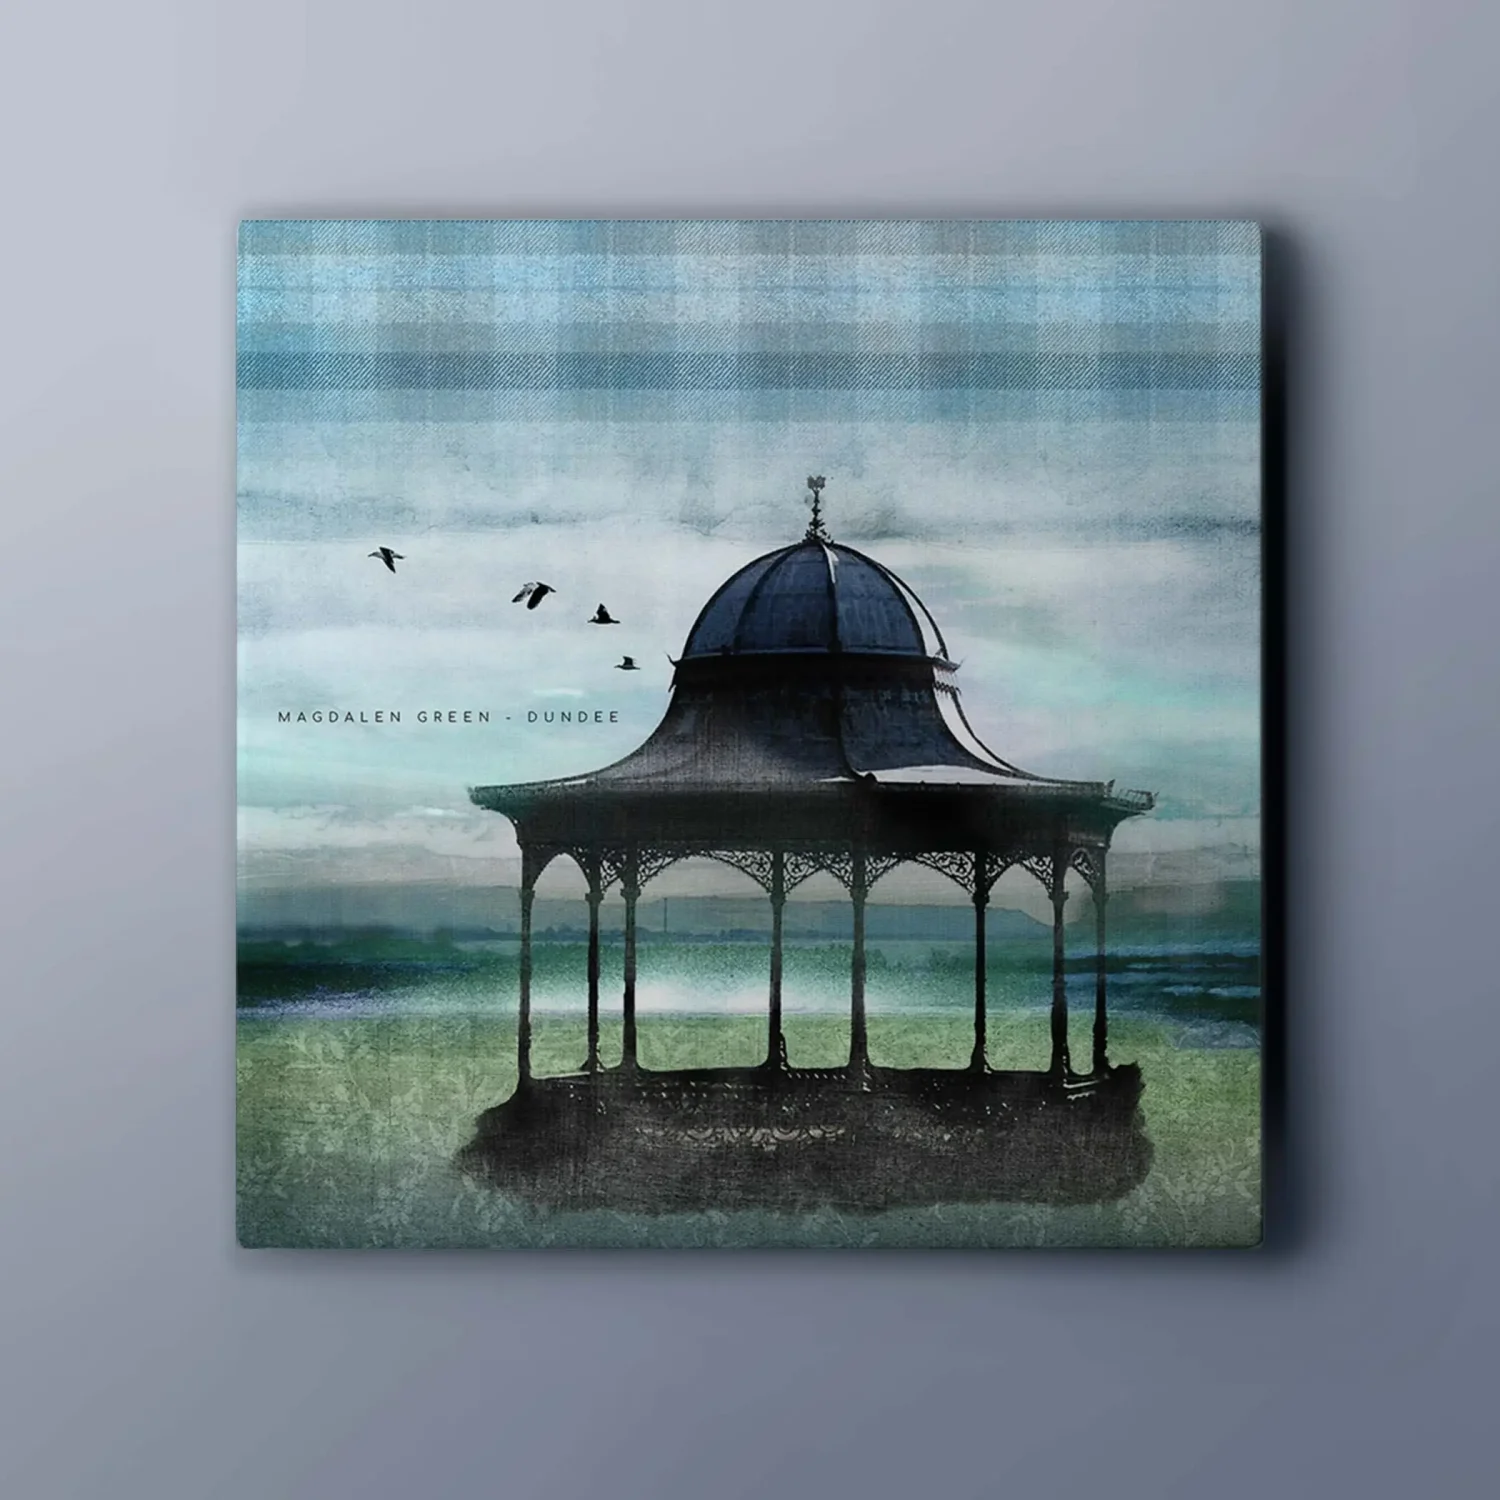 A grey wall with a canvas on it of a black bandstand (Magdalen GReen Dundee) and a tartan texture sky with birds inthe distance. There is text in the image that says Magdalen Green - dundee. The grass is green with a texture of white flowers and you can see the River Tay int eh background.